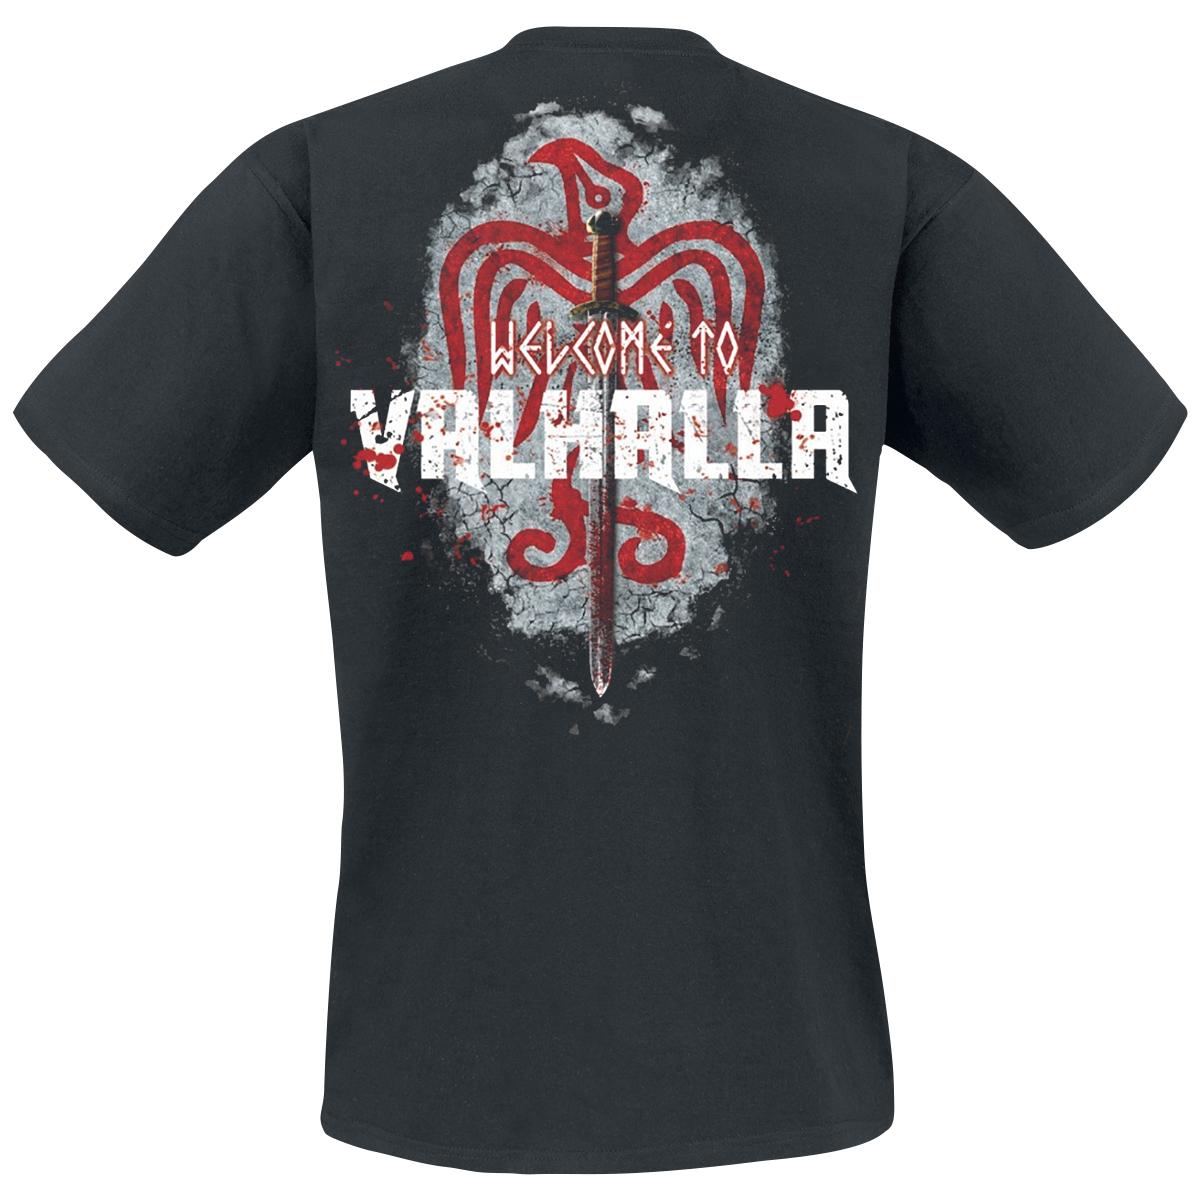 Welcome To Valhalla tee back